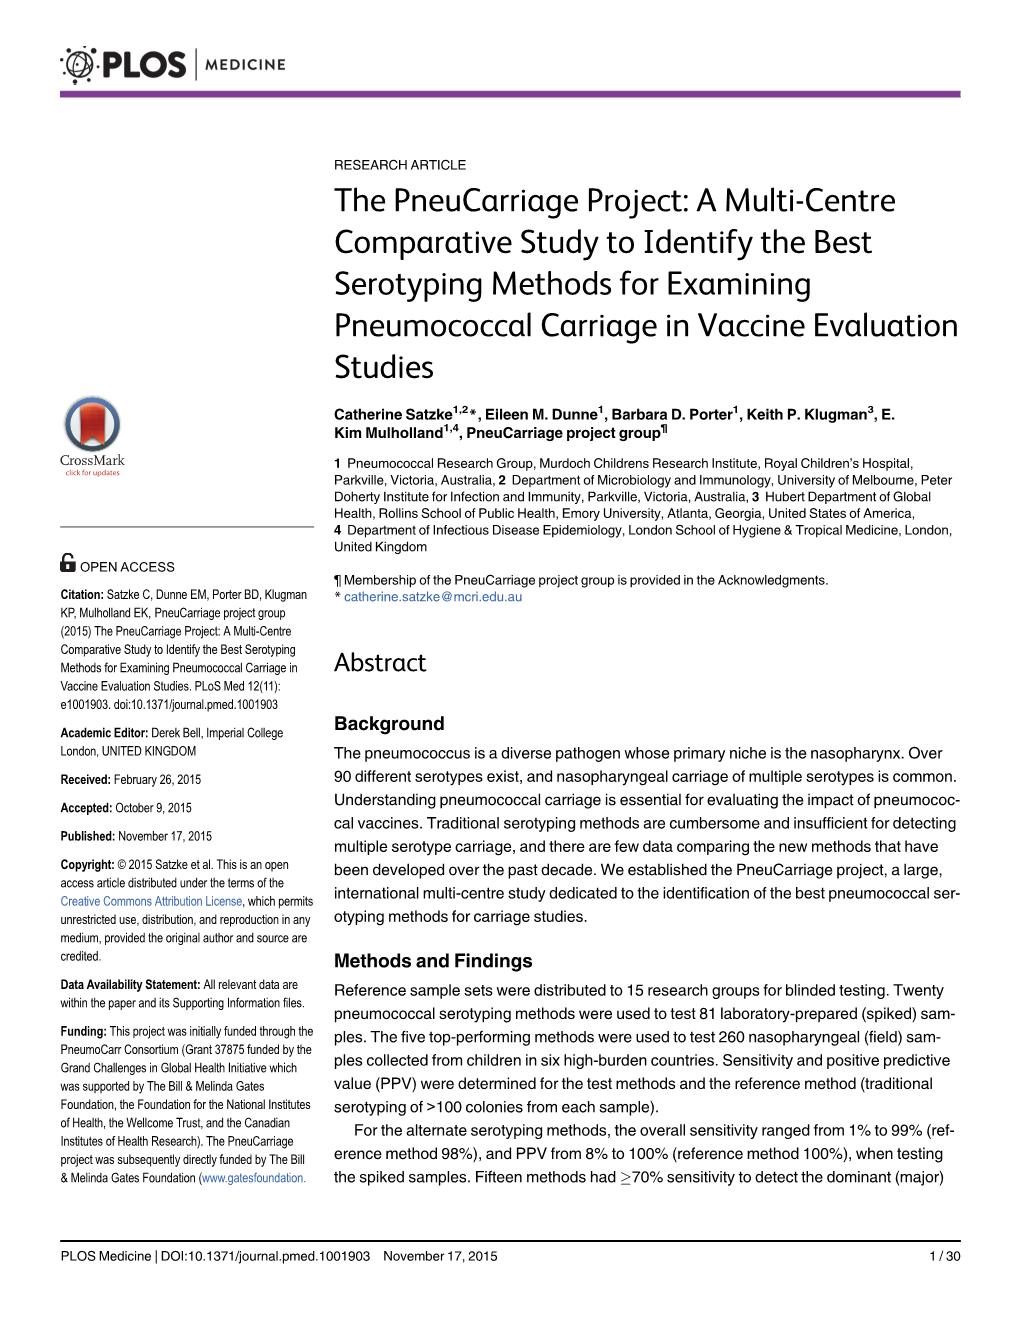 The Pneucarriage Project: a Multi-Centre Comparative Study to Identify the Best Serotyping Methods for Examining Pneumococcal Carriage in Vaccine Evaluation Studies